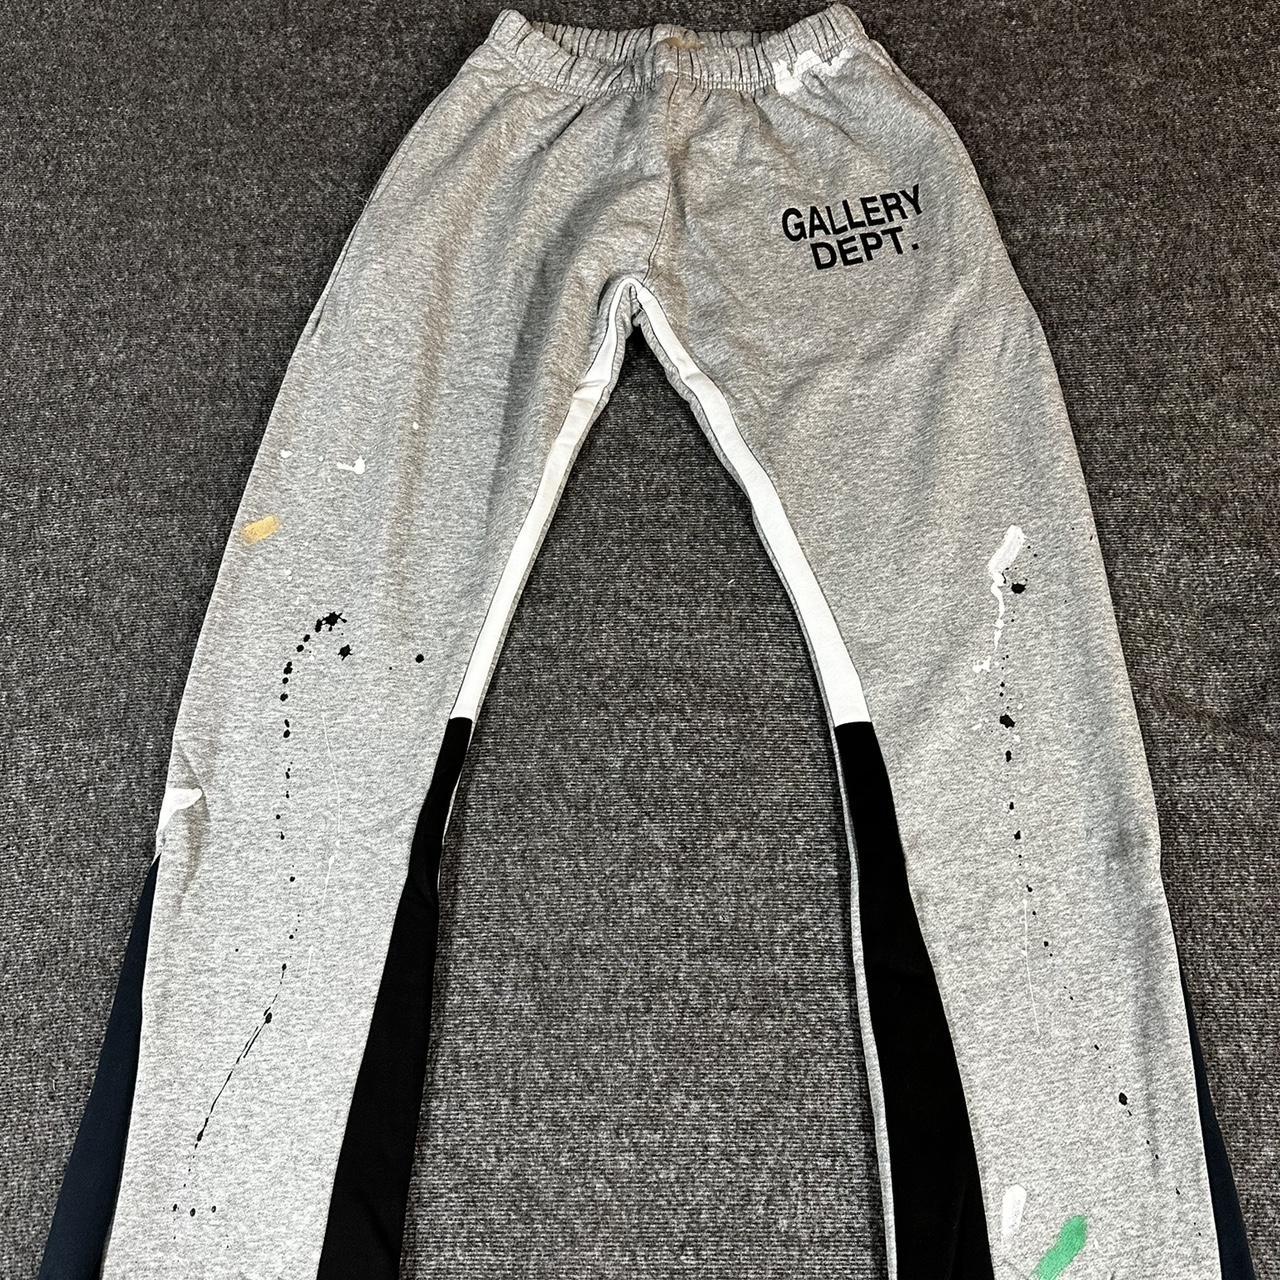 gallery dept. painted flare sweat pants size - Depop